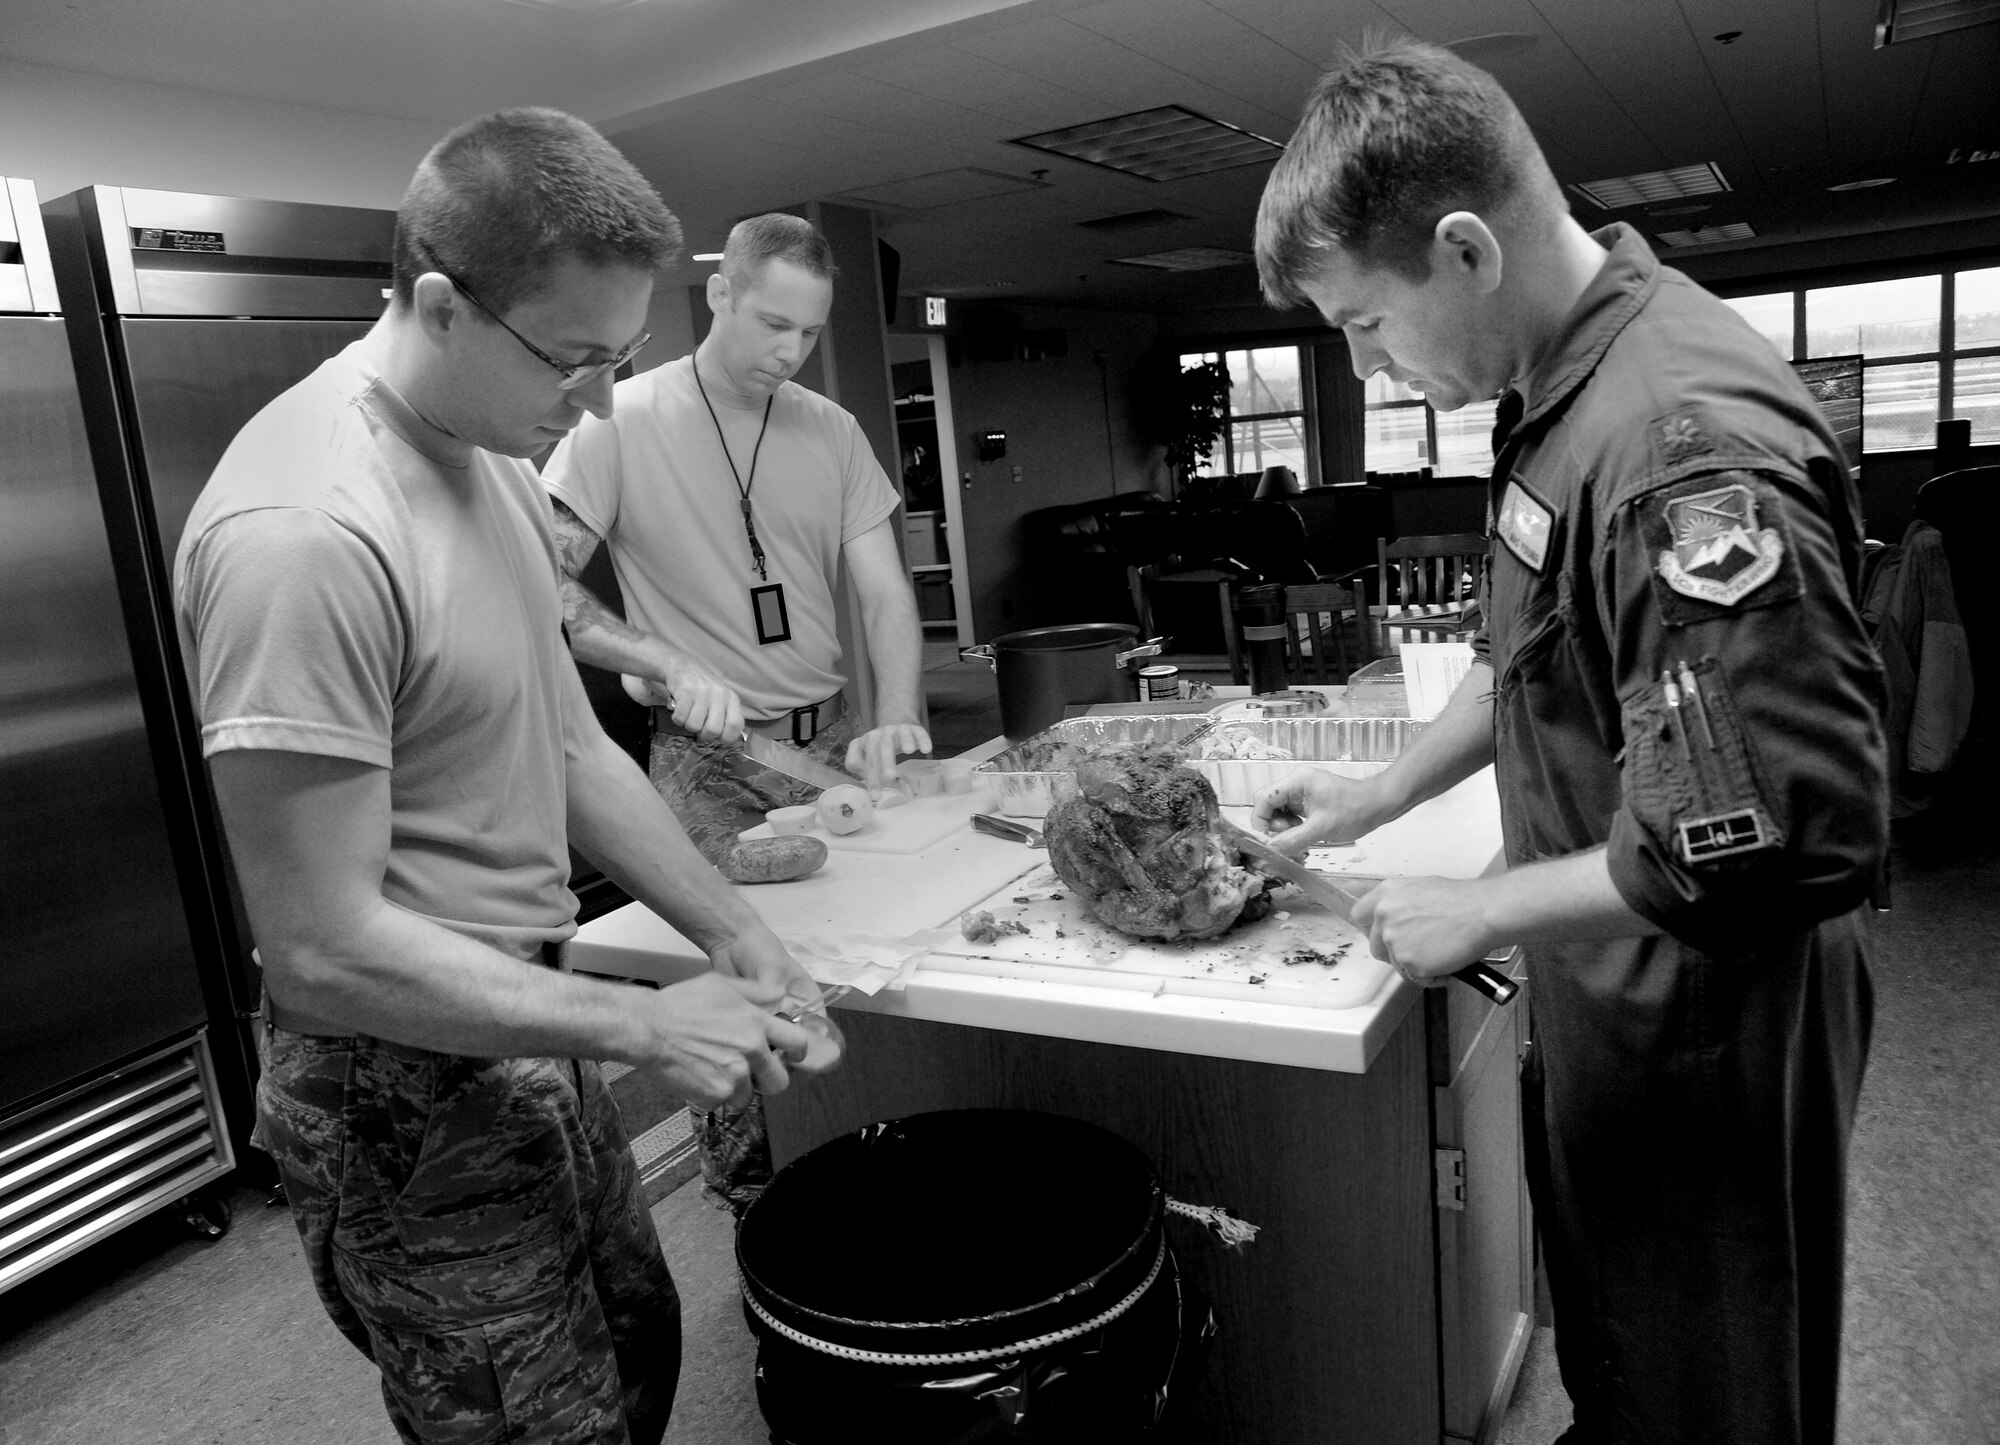 Oregon Air National Guard Maj. Bradley Young, a pilot assigned to the 123rd Fighter Squadron, 142nd Fighter Wing, Portland Air National Guard Base, Ore., cuts a Thanksgiving Turkey at the Alert Facility, as Staff Sgt. Matthew Shelburne, left, and Staff Sgt. Kyle Adair, center, prepare potatoes for dinner, Nov. 27, 2014. (U.S. Air National Guard photo by Tech. Sgt. John Hughel, 142nd Fighter Wing Public Affairs/Released)